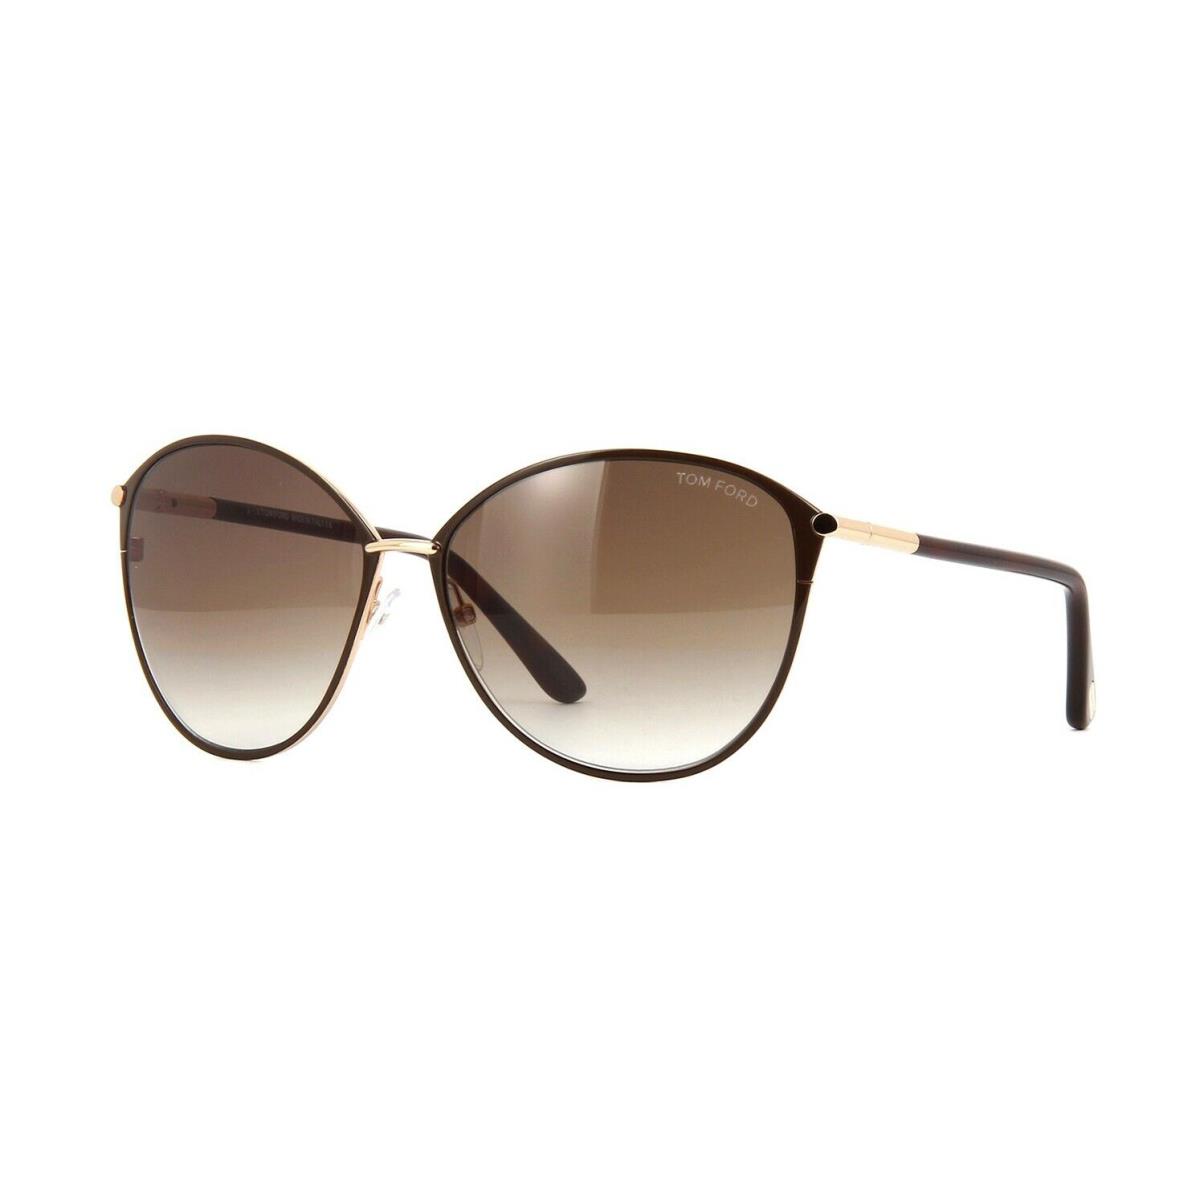 Tom Ford Penelope FT 0320 Brown Gold Havana/brown Amber Shaded 28F Sunglasses